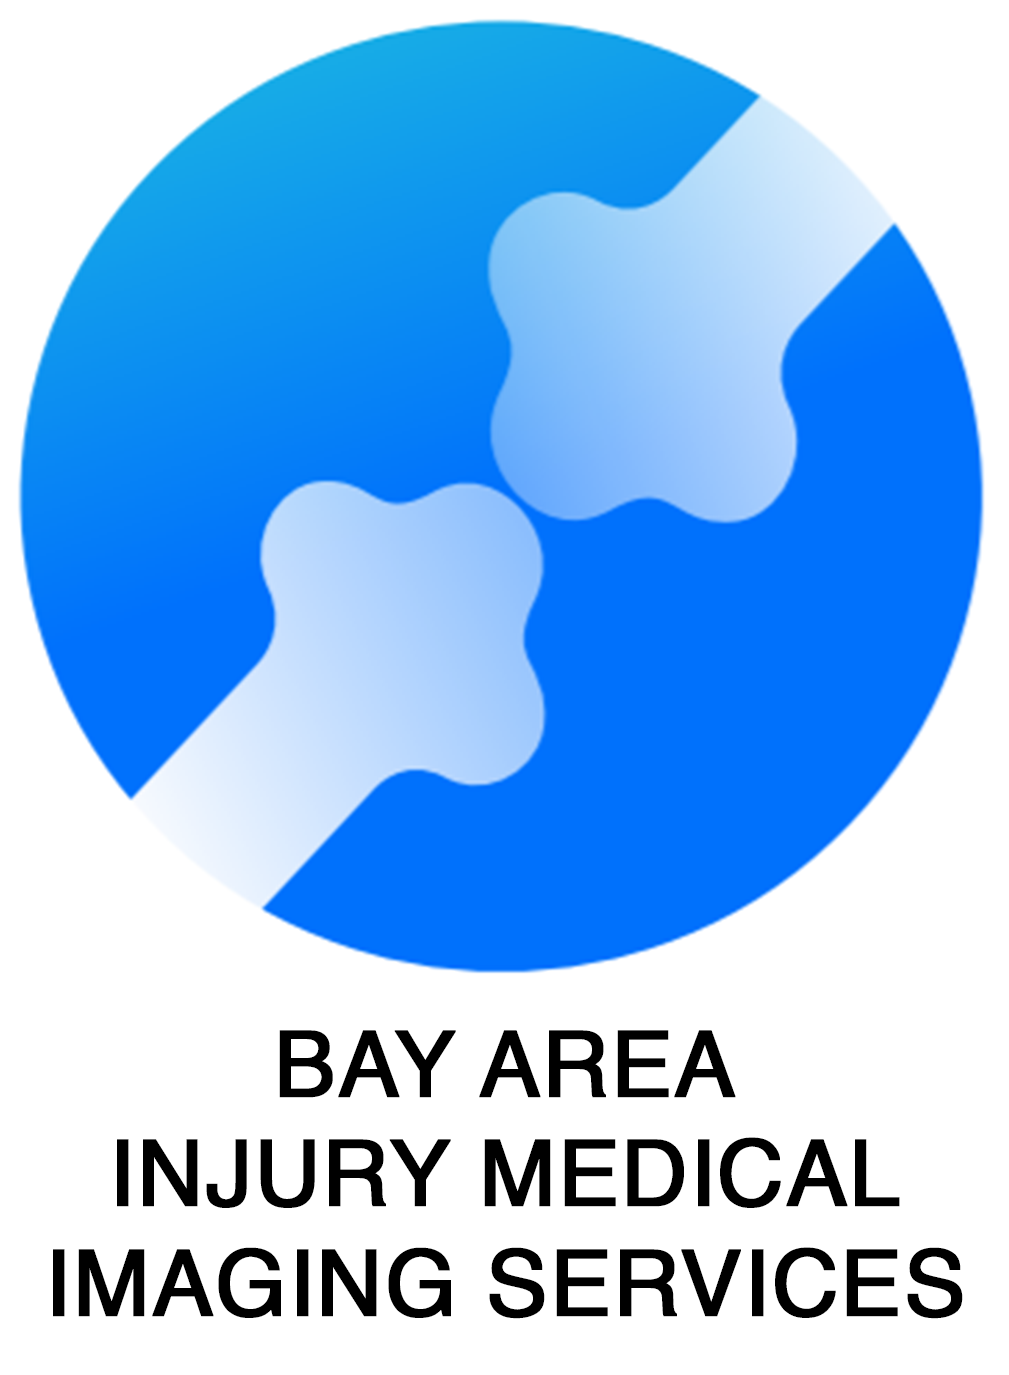 BAY AREA INJURY MEDICAL IMAGING SERVICES (DAILY CITY)